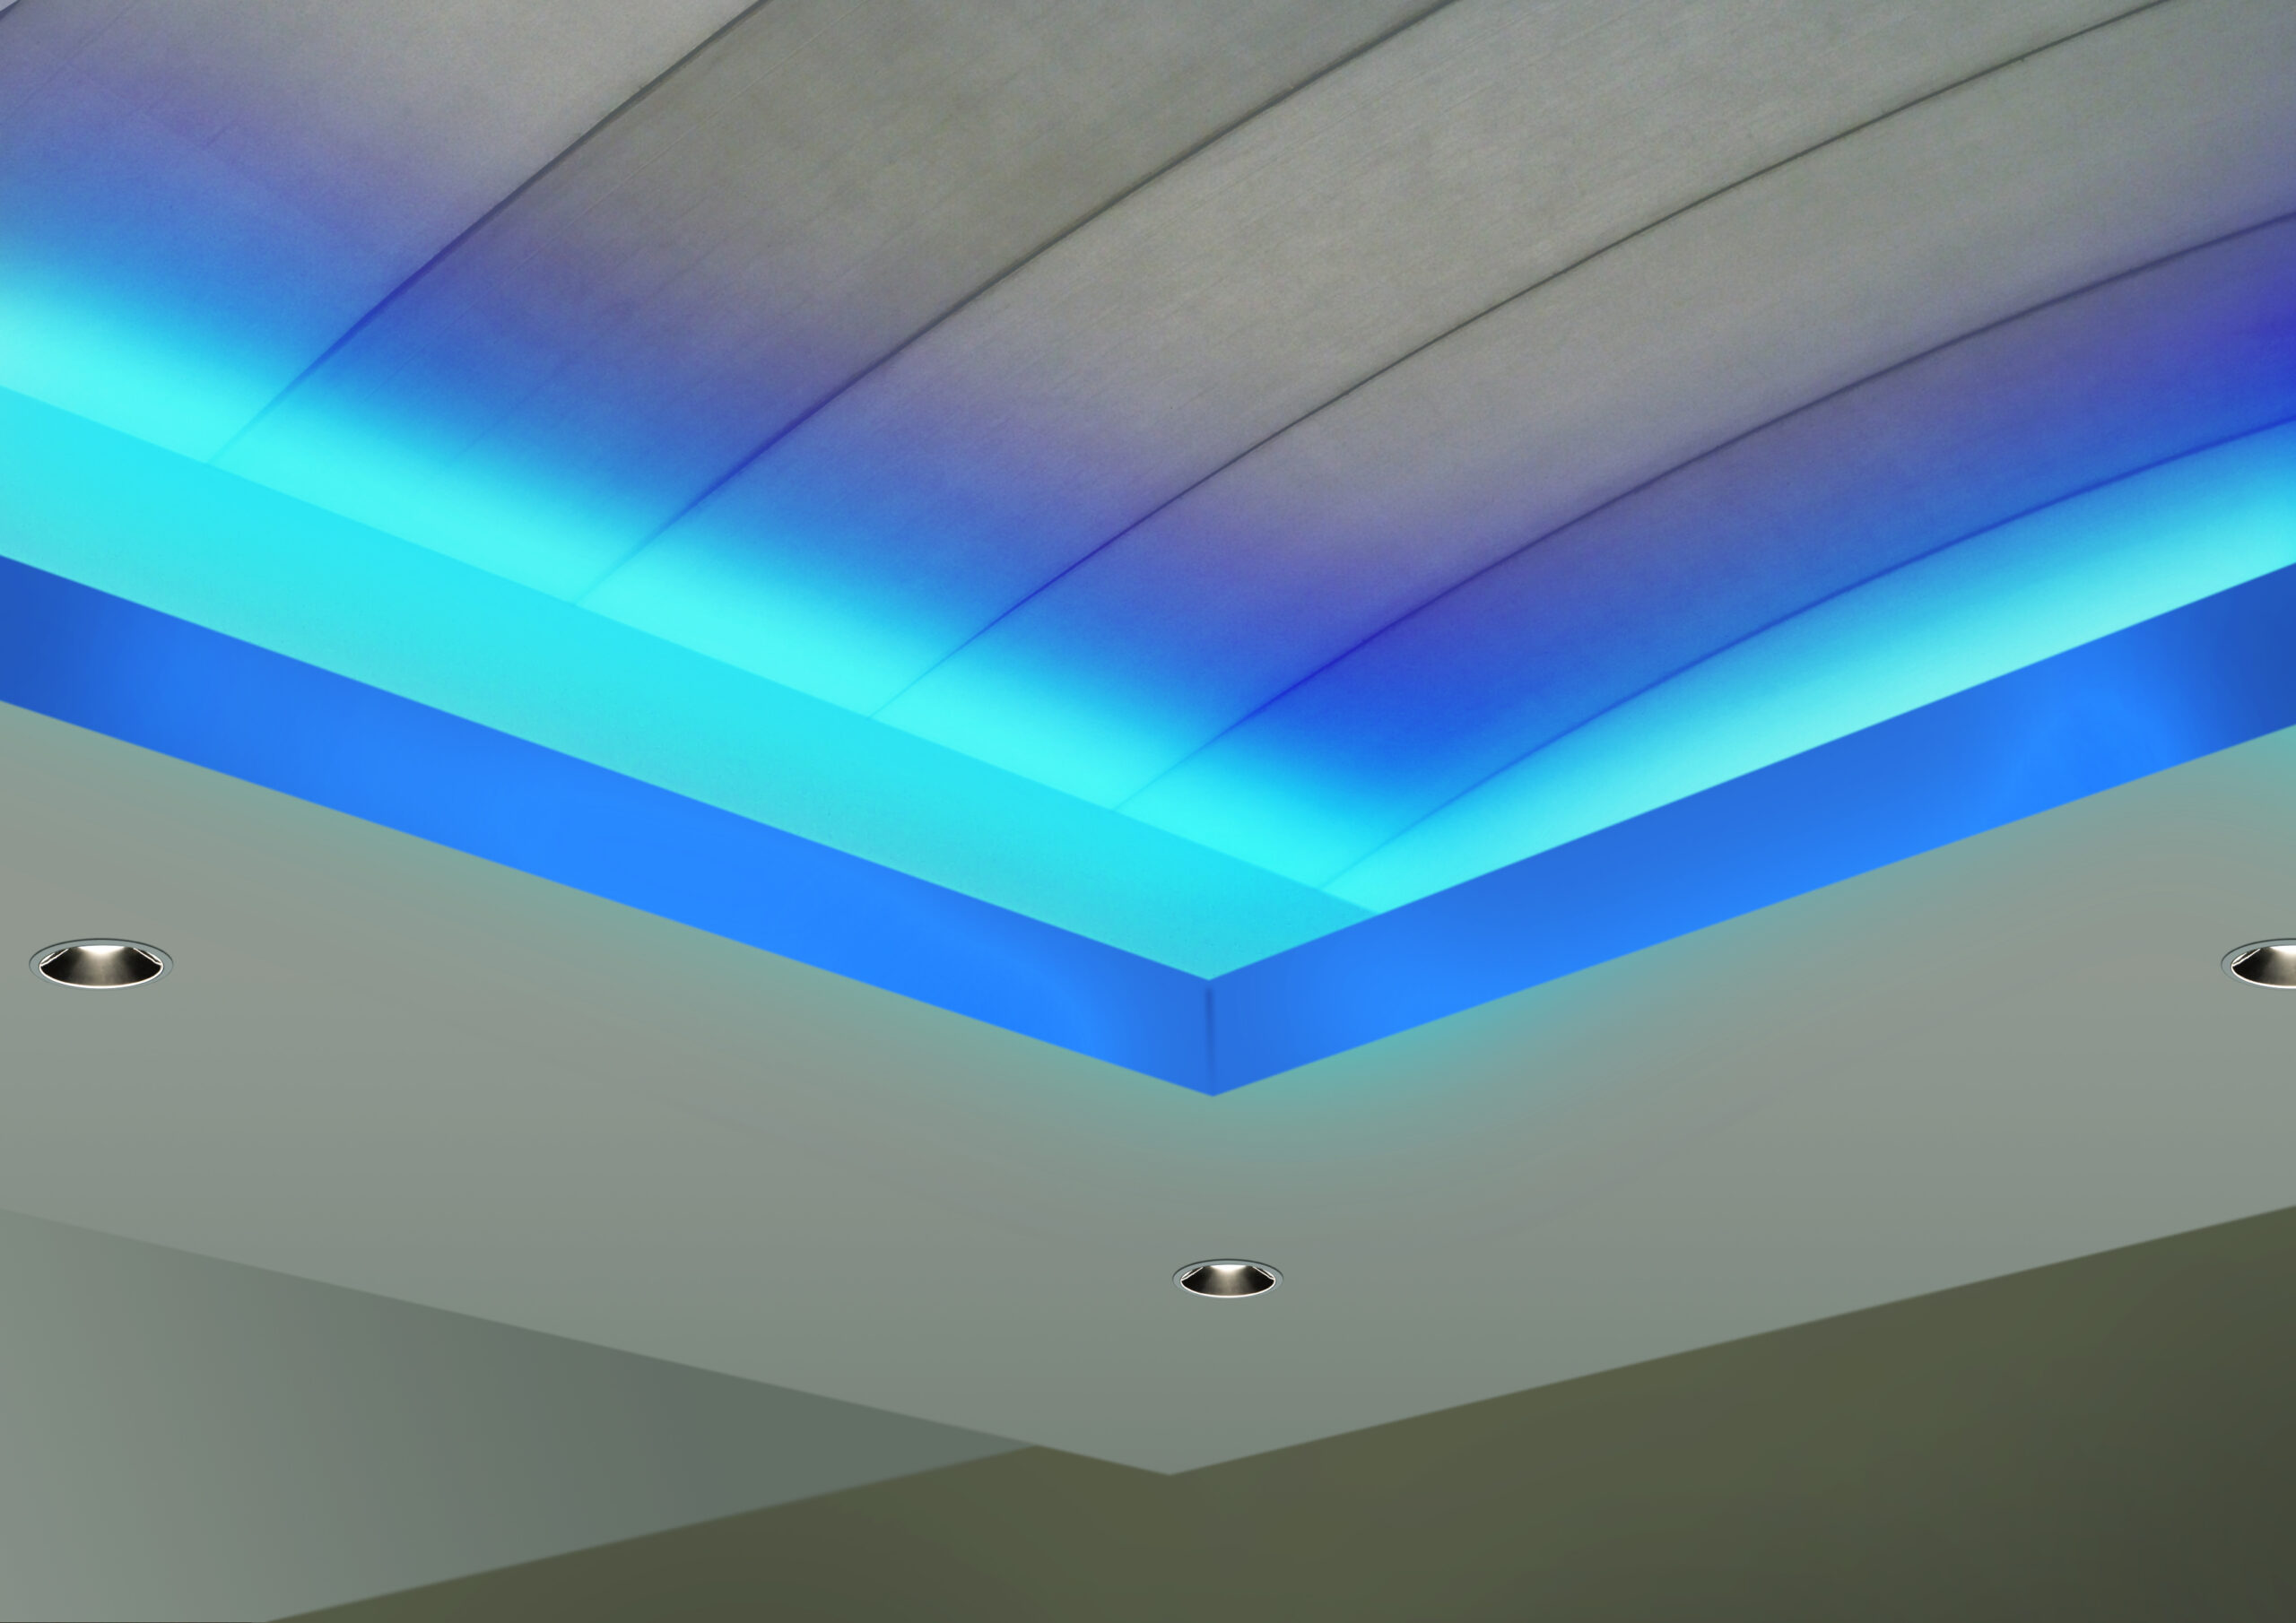 Cove Lighting - Arched Ceiling - Blue Light